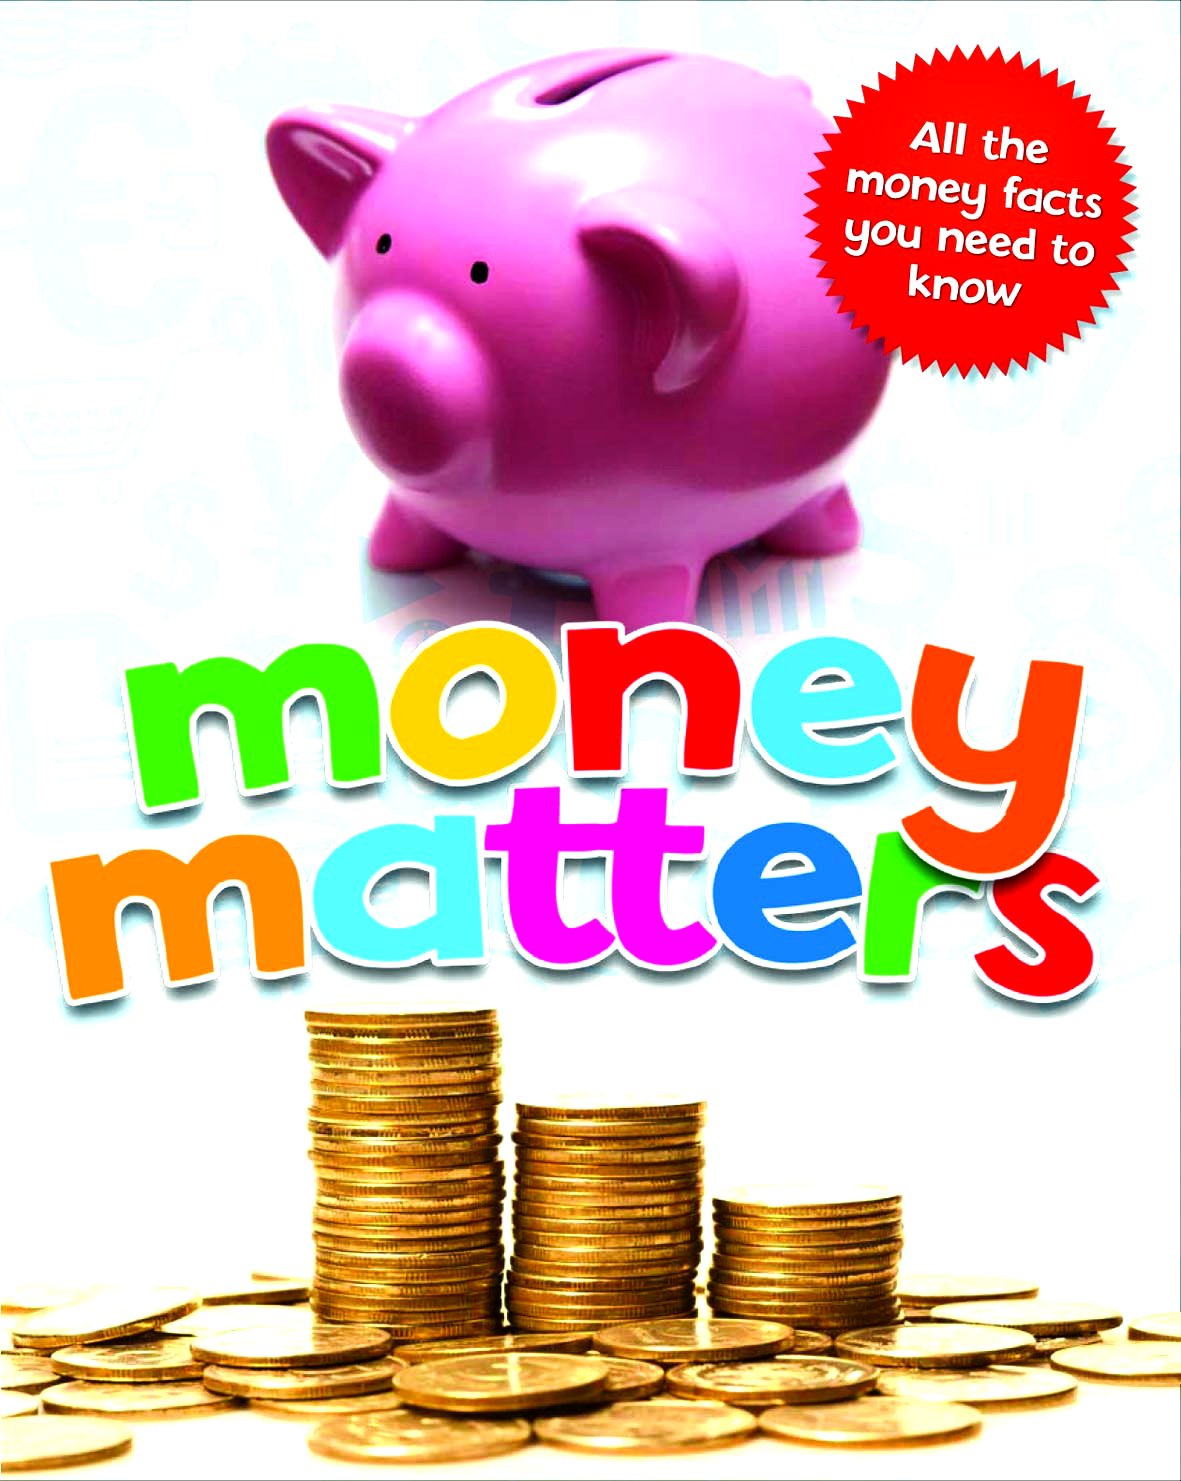 Money Matters Google image from http://www.qed-publishing.co.uk/images/covers/Money%20Matters%20Cover.jpg